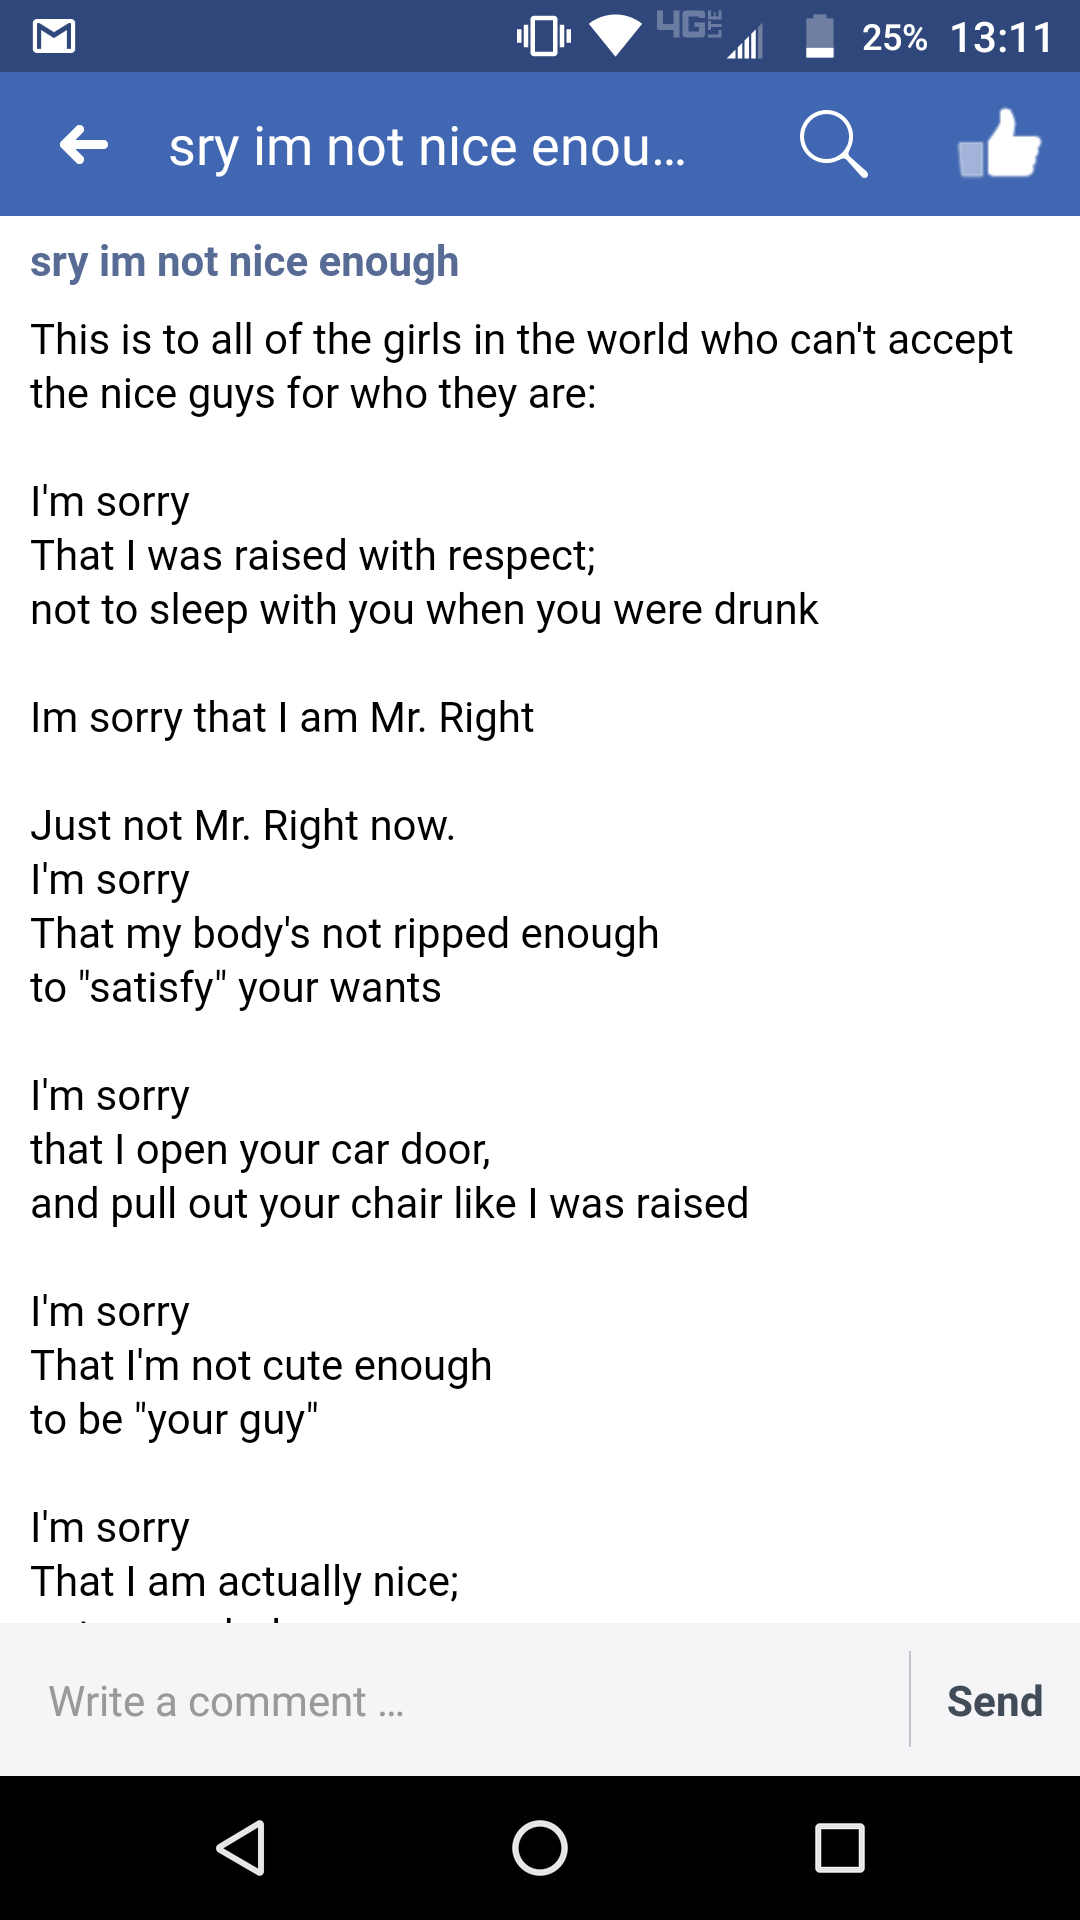 a note poem about being a &quot;nice guy,&quot; AKA very entitled and bitter that he&#x27;s not popular